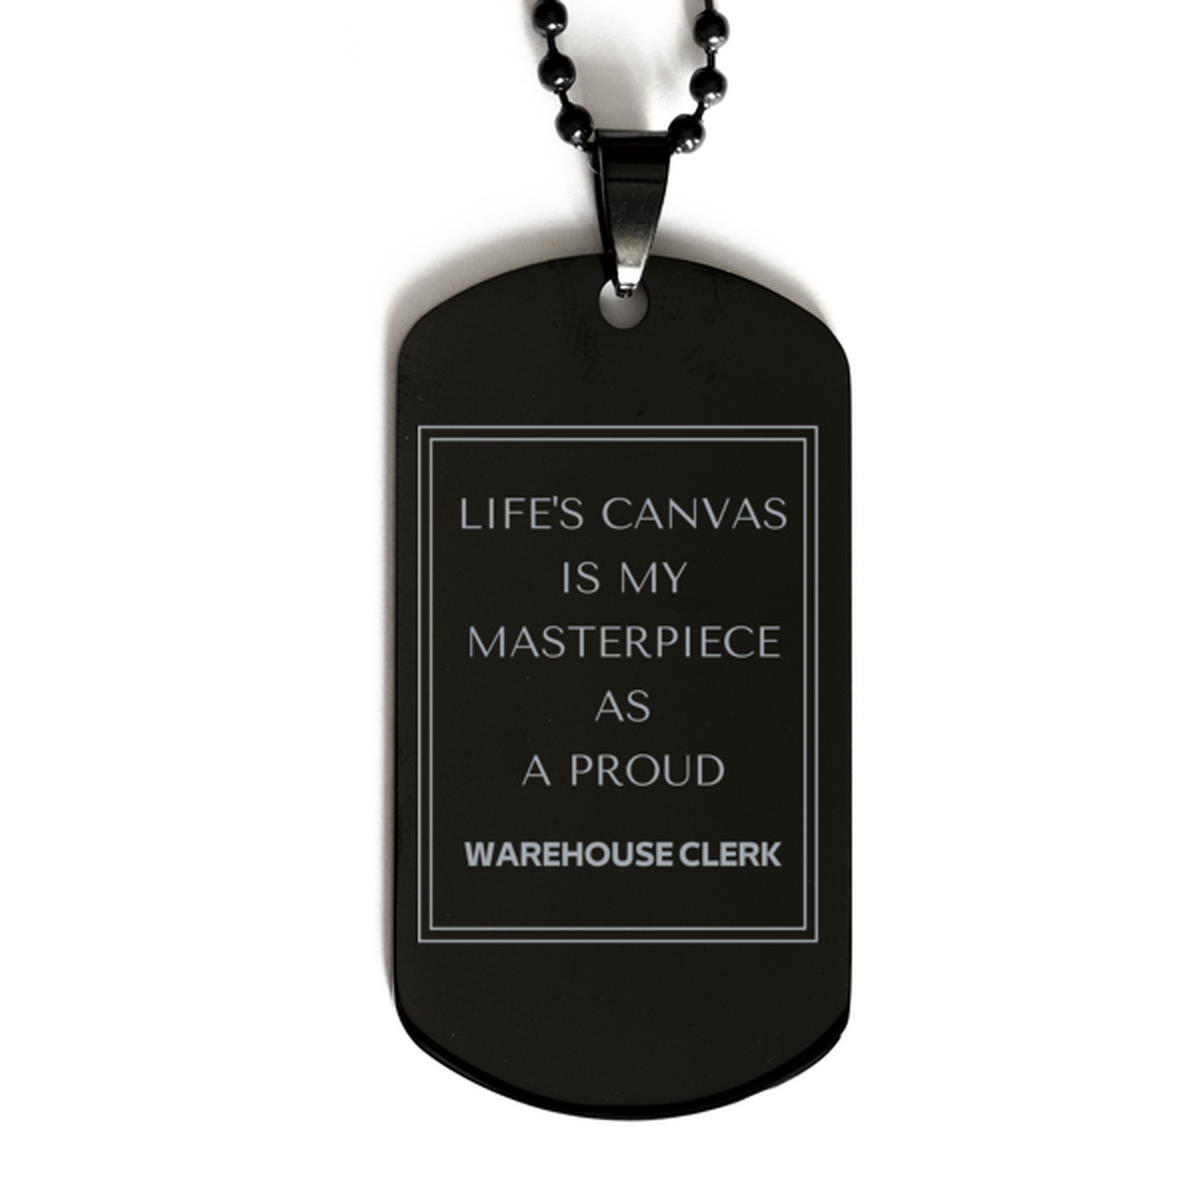 Proud Warehouse Clerk Gifts, Life's canvas is my masterpiece, Epic Birthday Christmas Unique Black Dog Tag For Warehouse Clerk, Coworkers, Men, Women, Friends